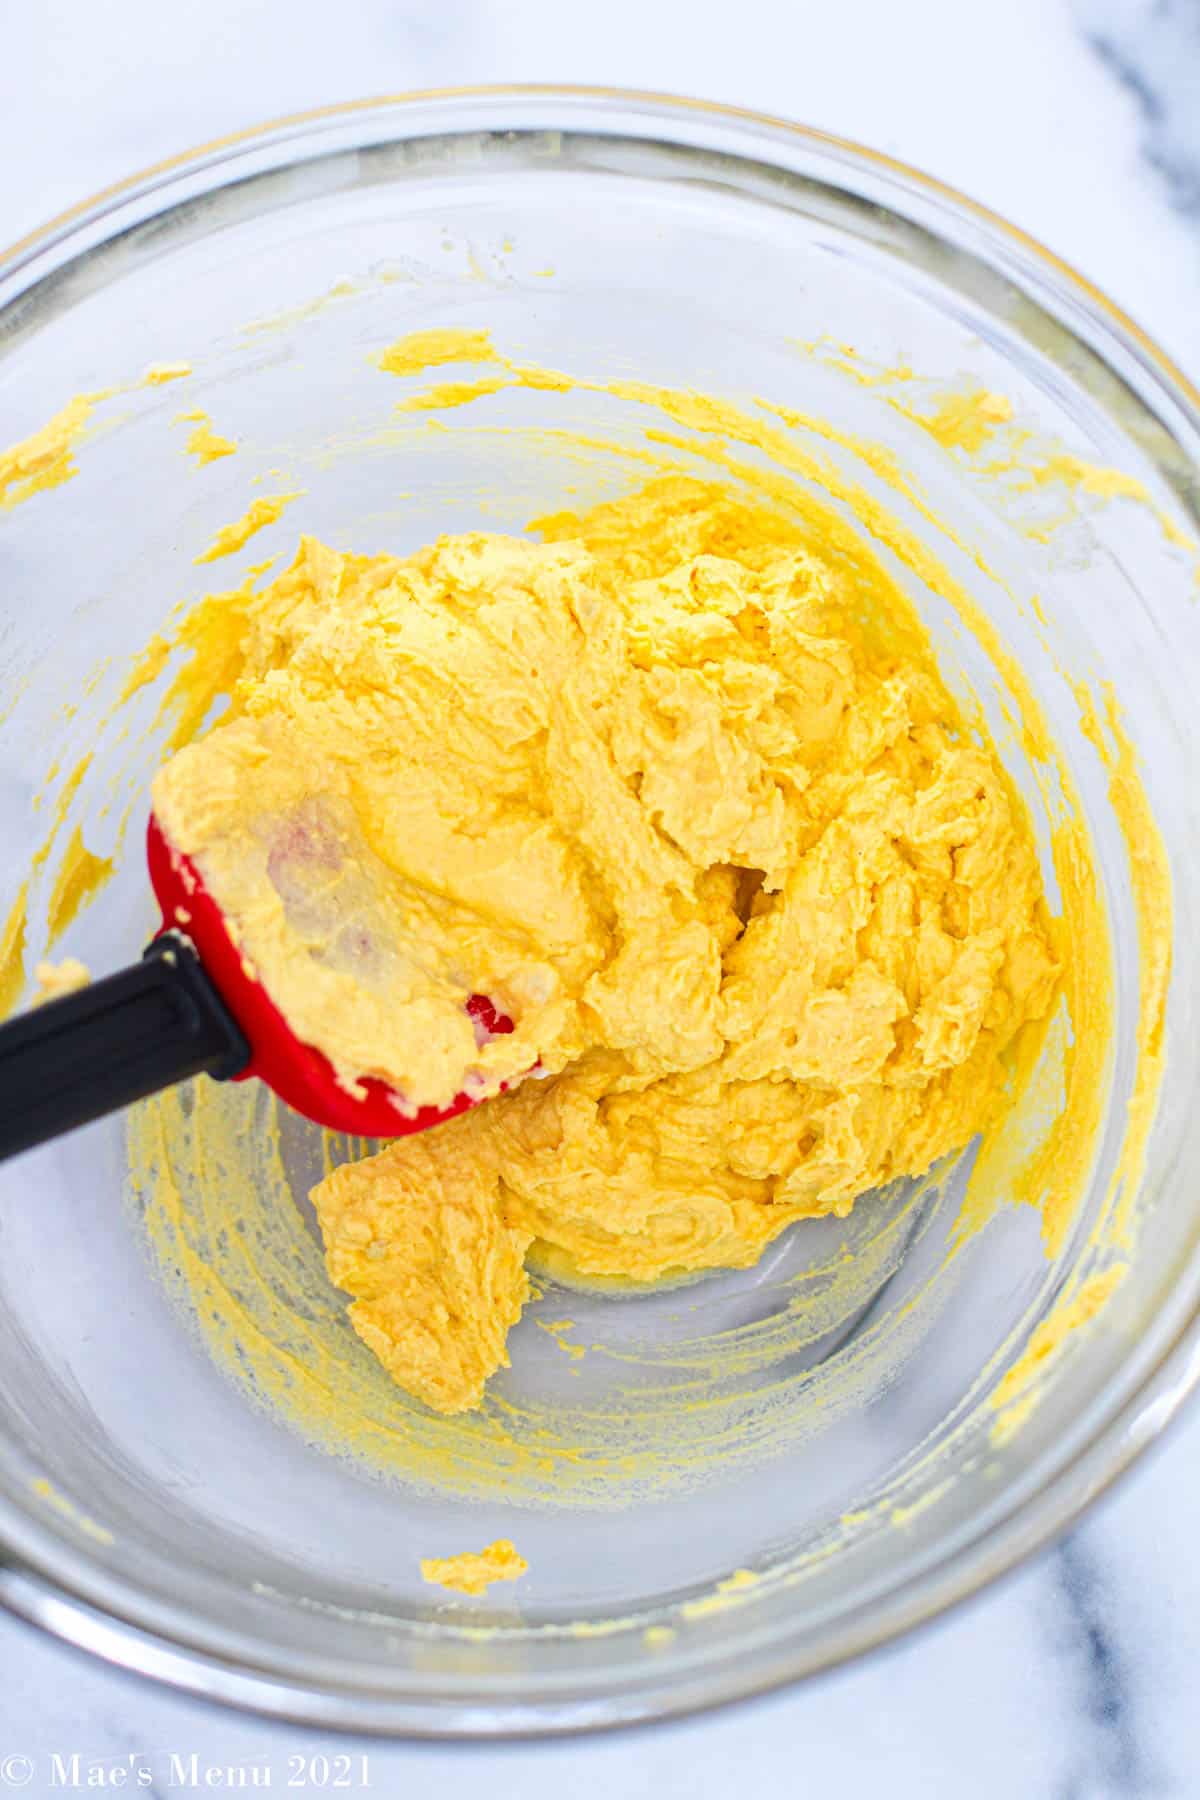 The egg yolk mixture in a mixing bowl